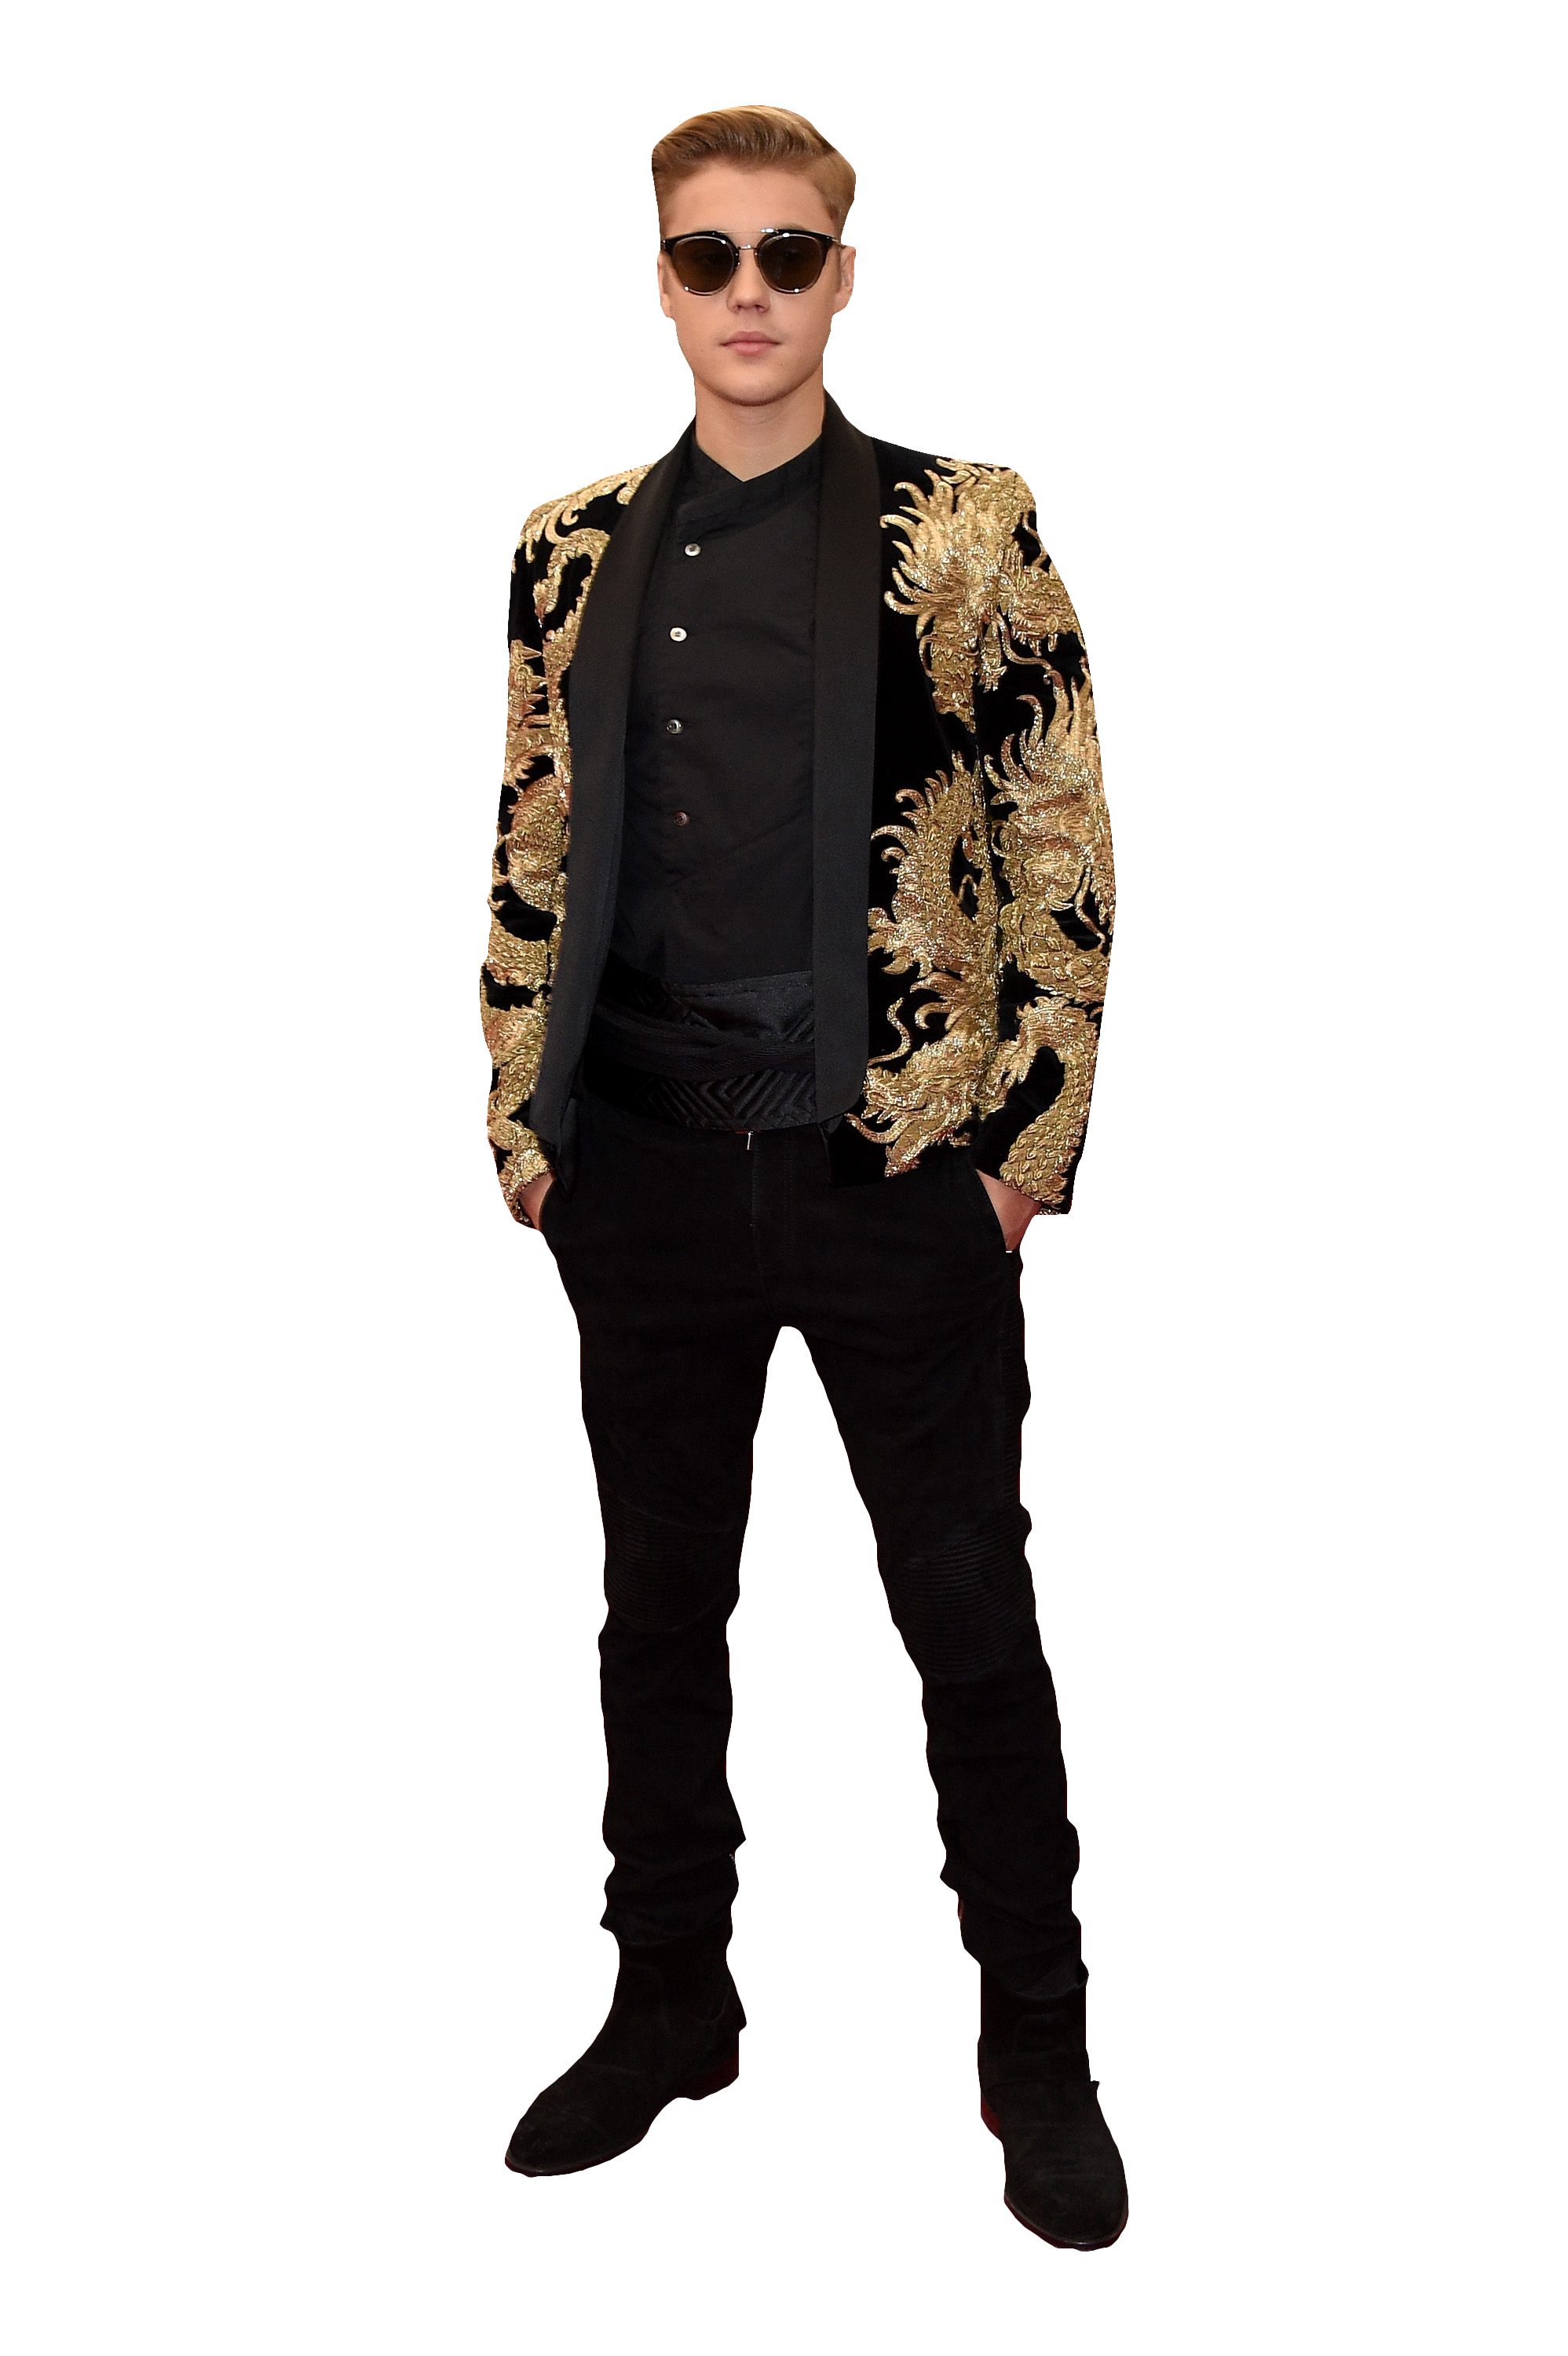 Justin Bieber in Sunglasses PNG Image